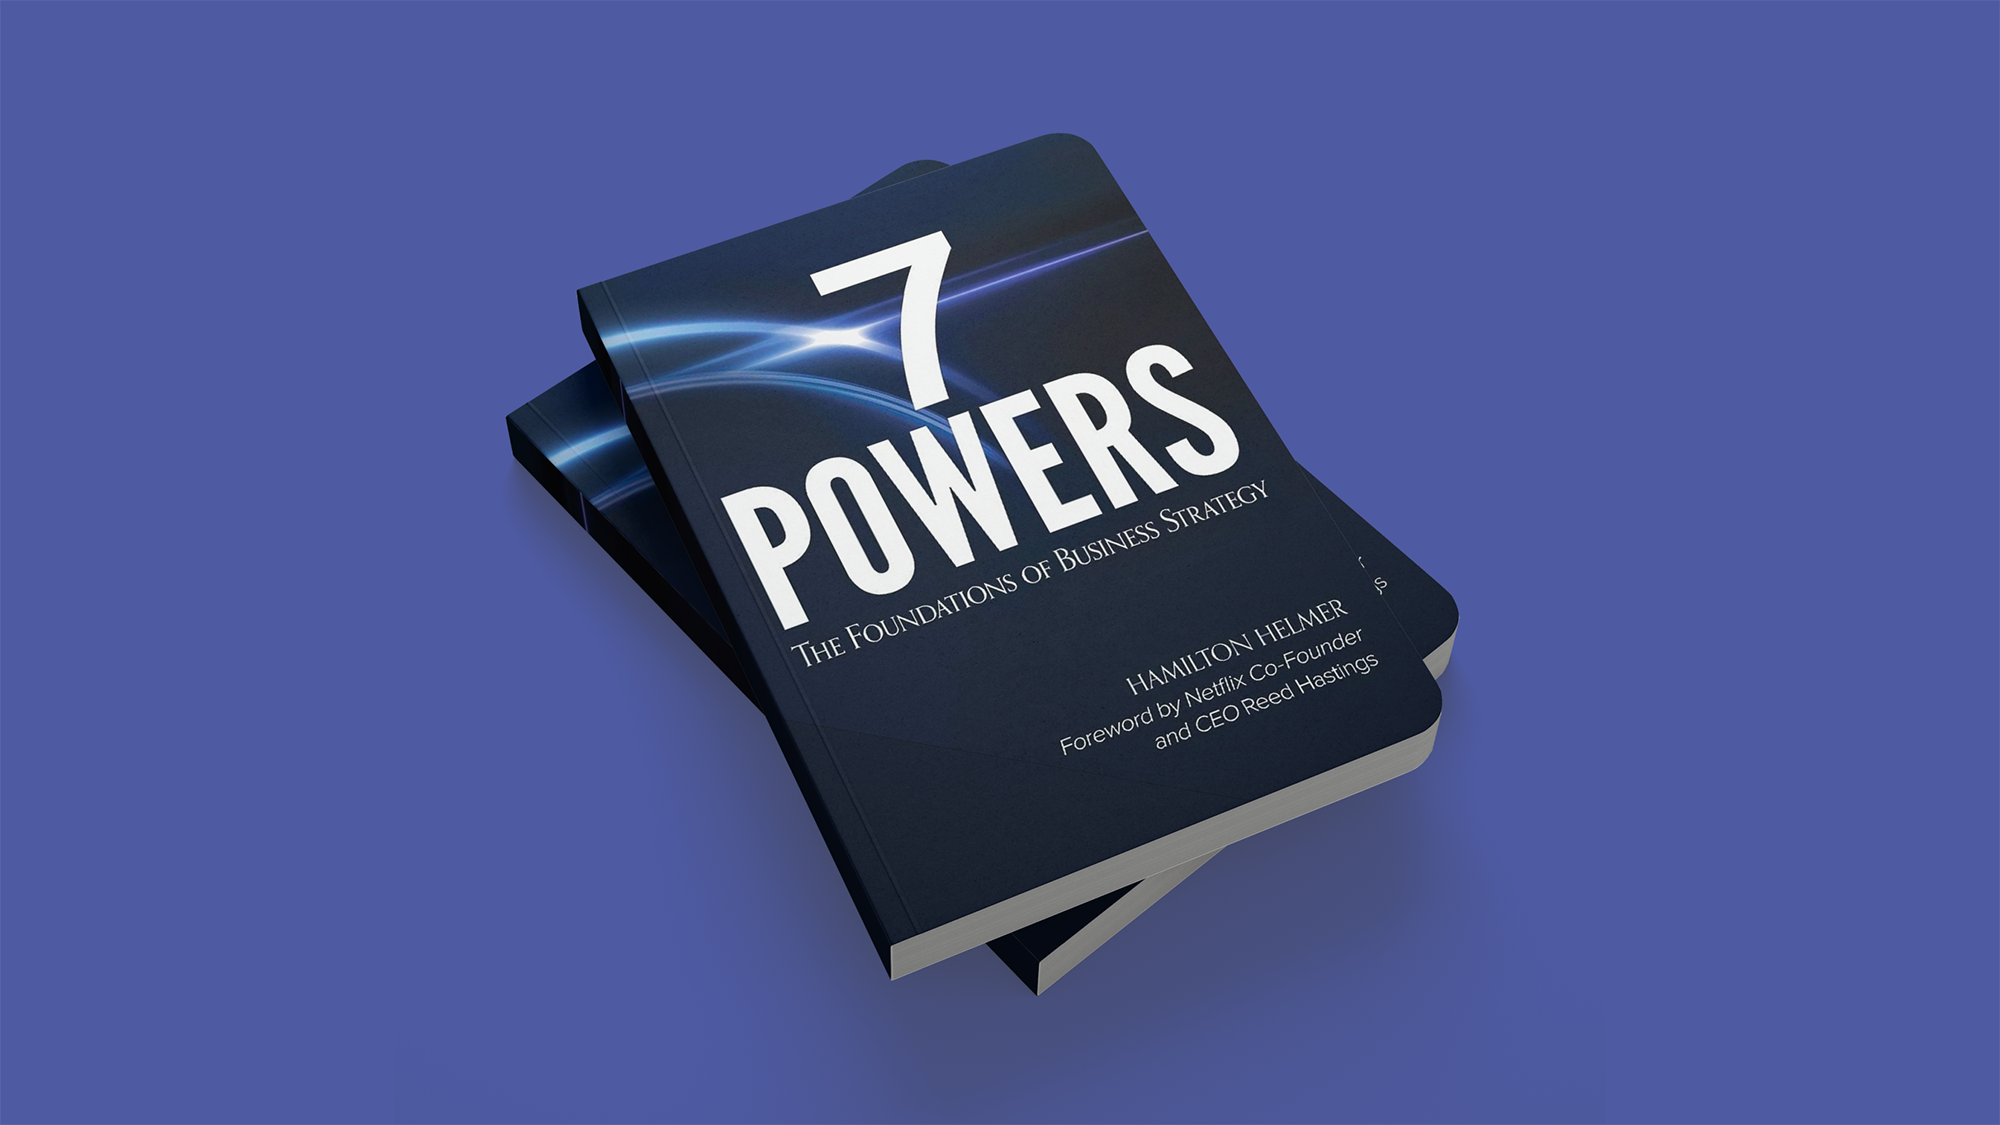 7 Powers by Hamilton Helmer, a respected framework for competitive analysis in business & investing